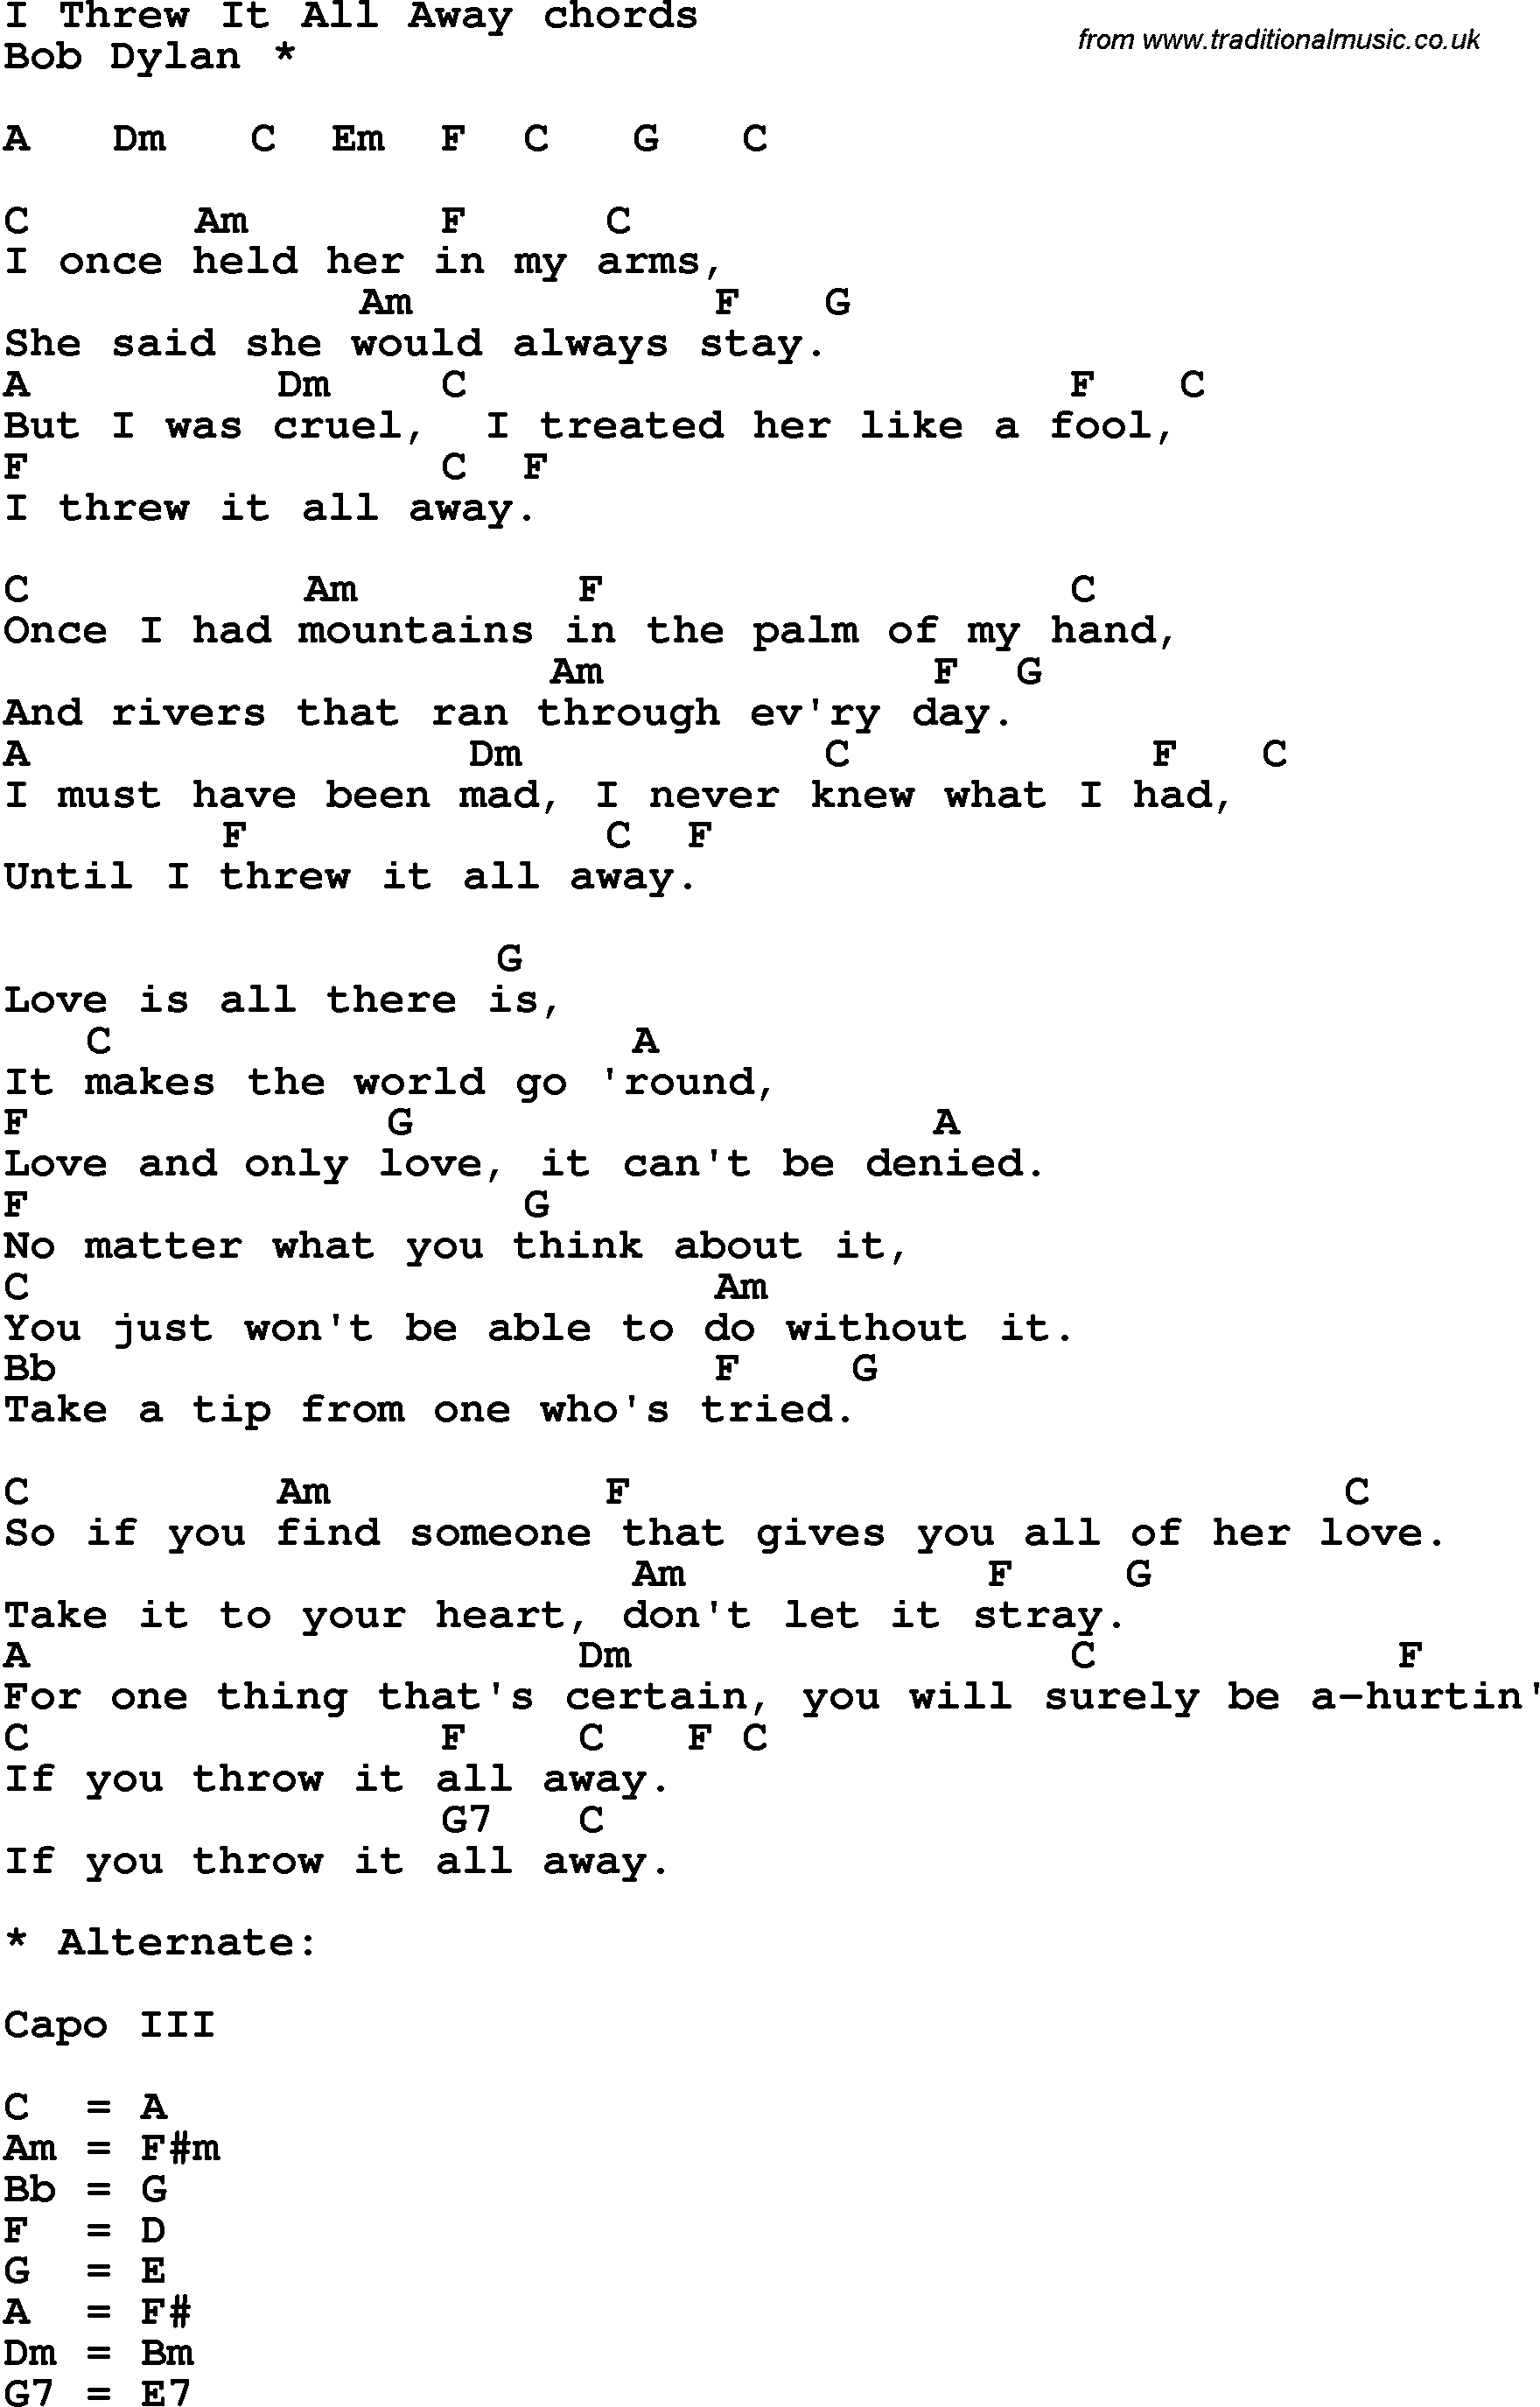 Song Lyrics with guitar chords for I Threw It All Away